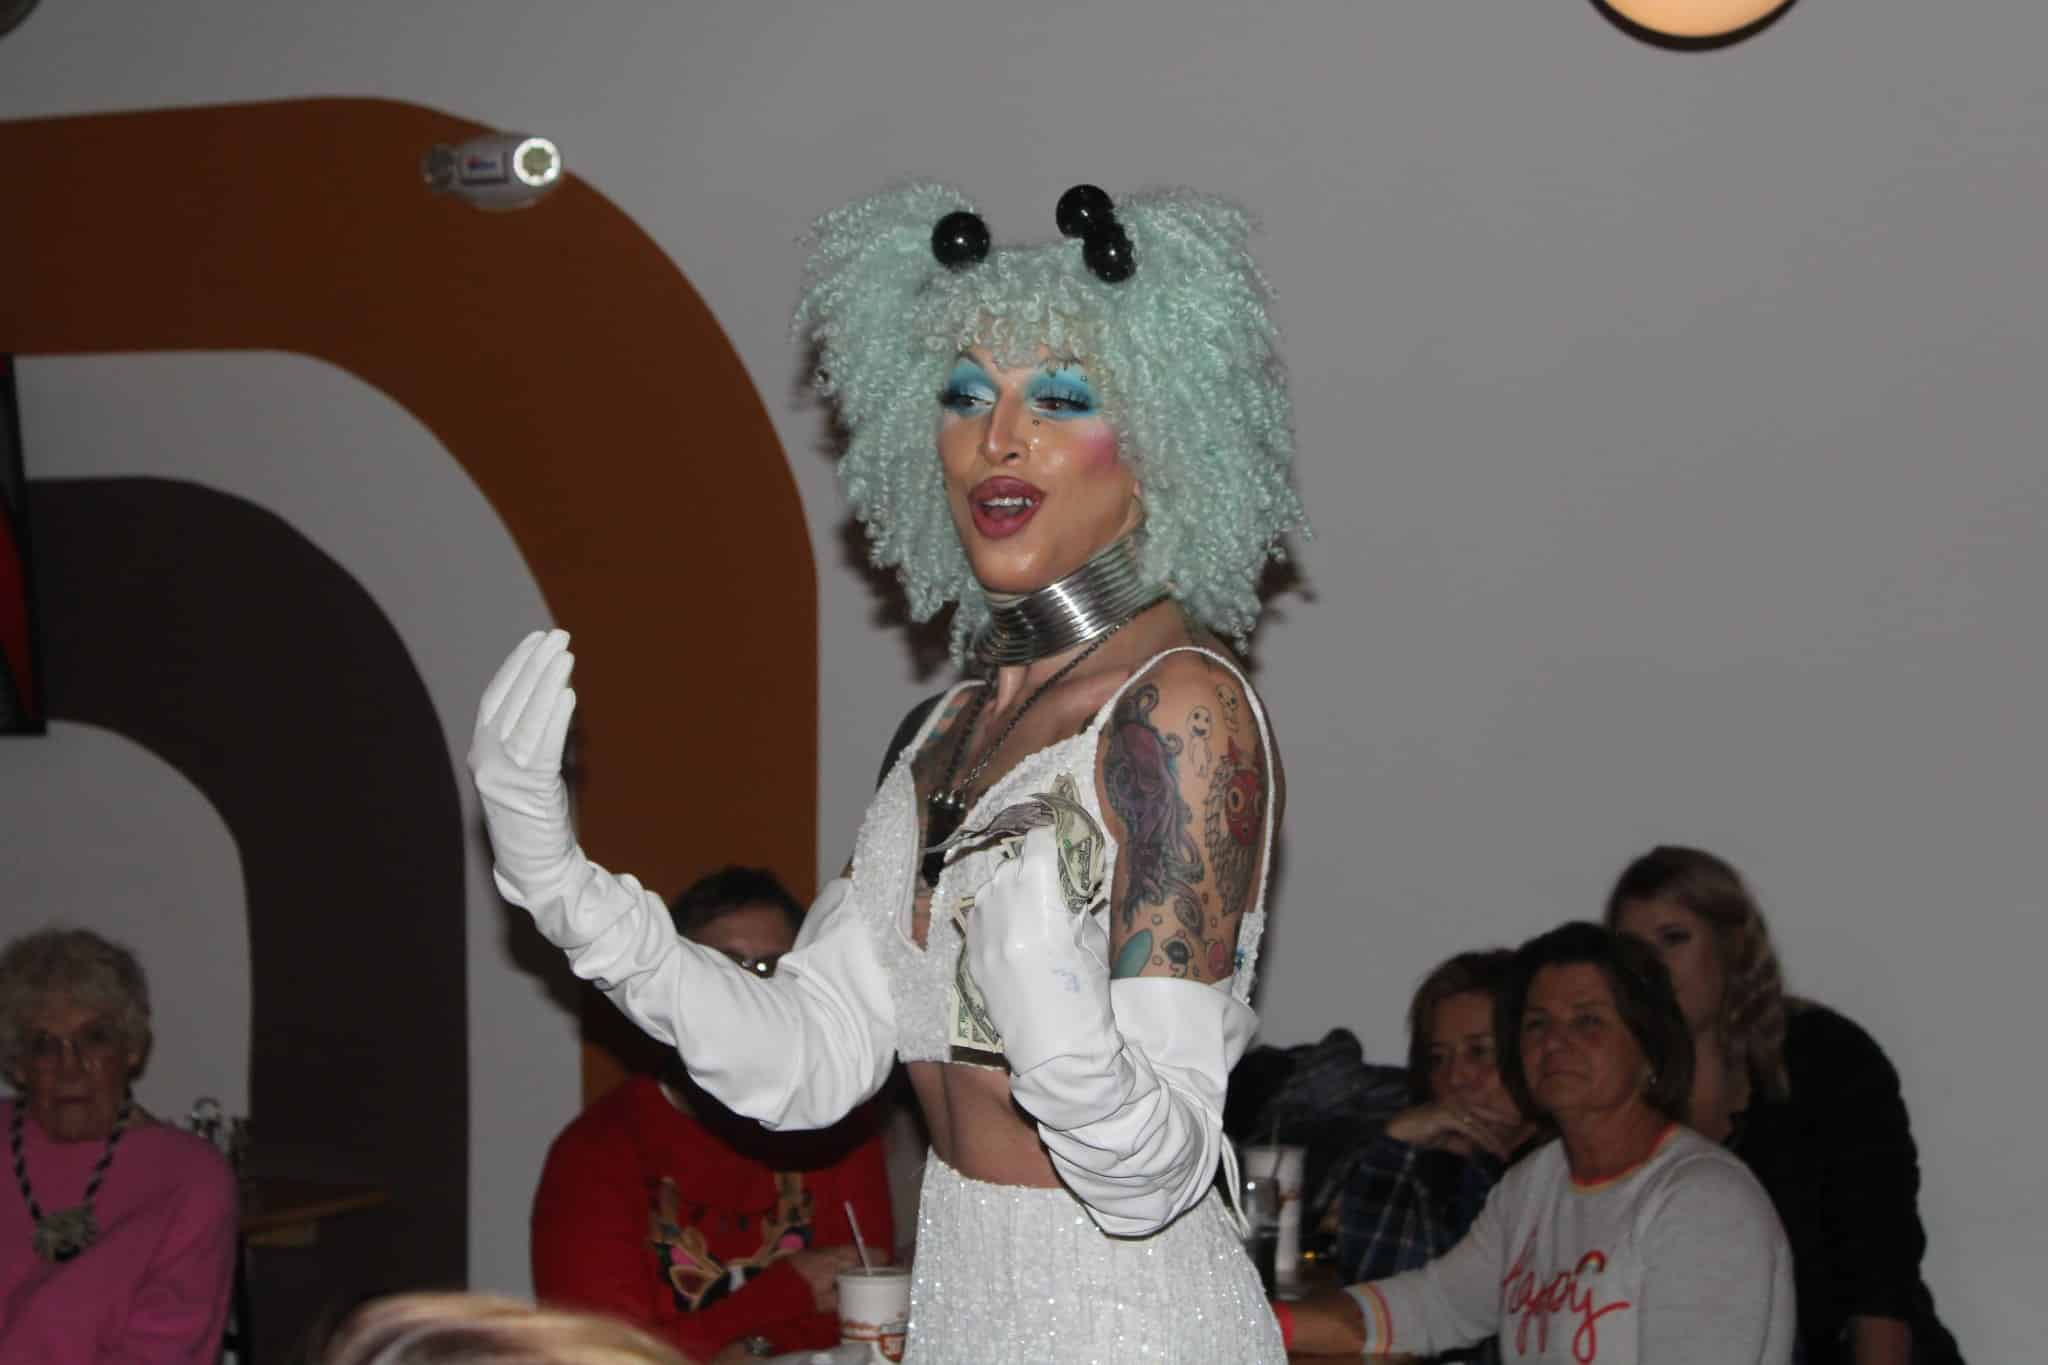 A person in a seafoam green curly wig, white gloves to their elbows, and matching white skirt and crop top stands in the foreground smiling. Several people sit behind them watching.